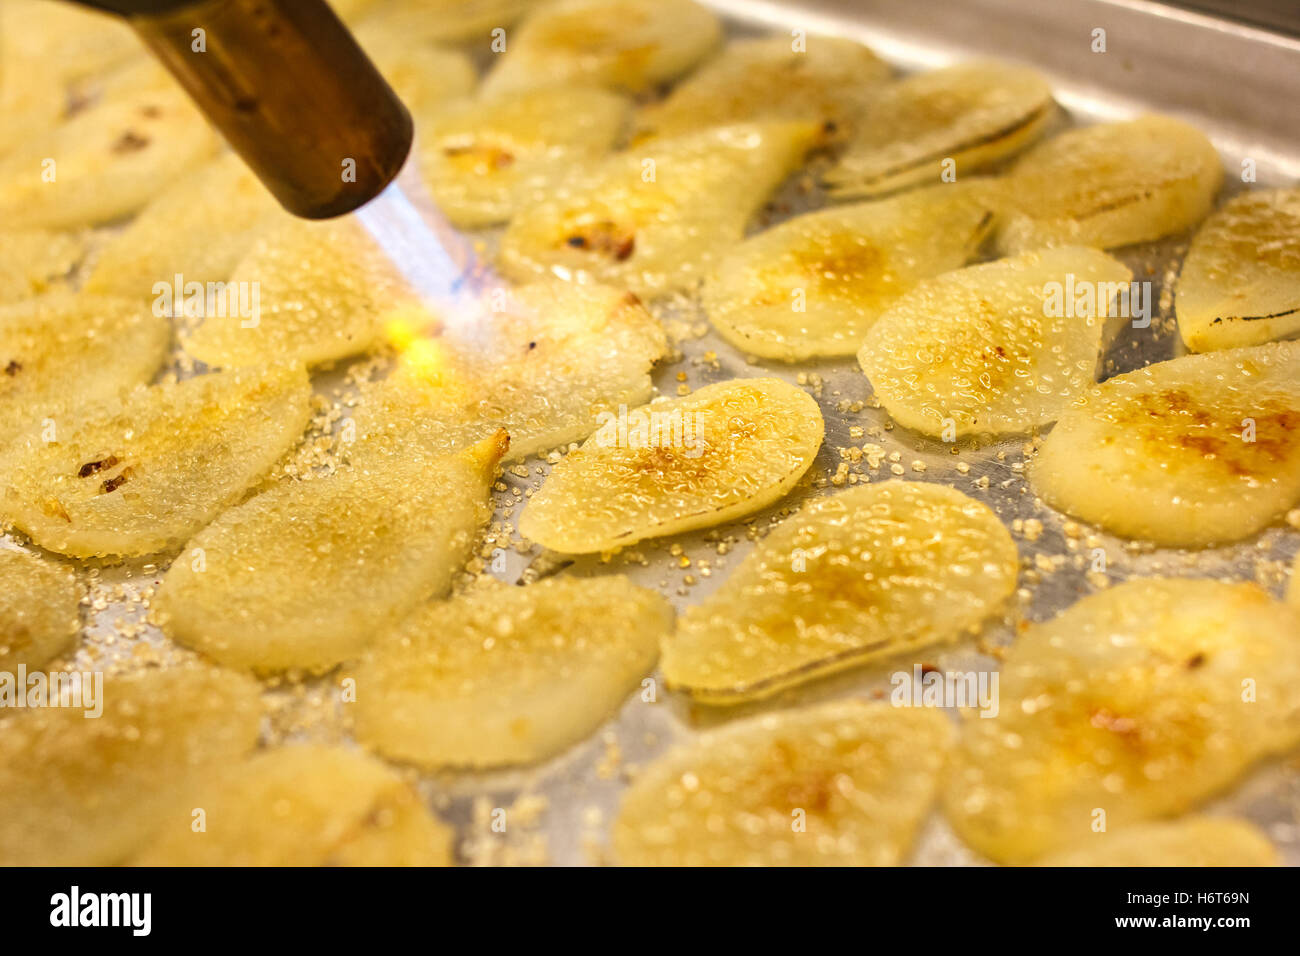 Blowtorch caramelising sugar on pear slices. Stock Photo